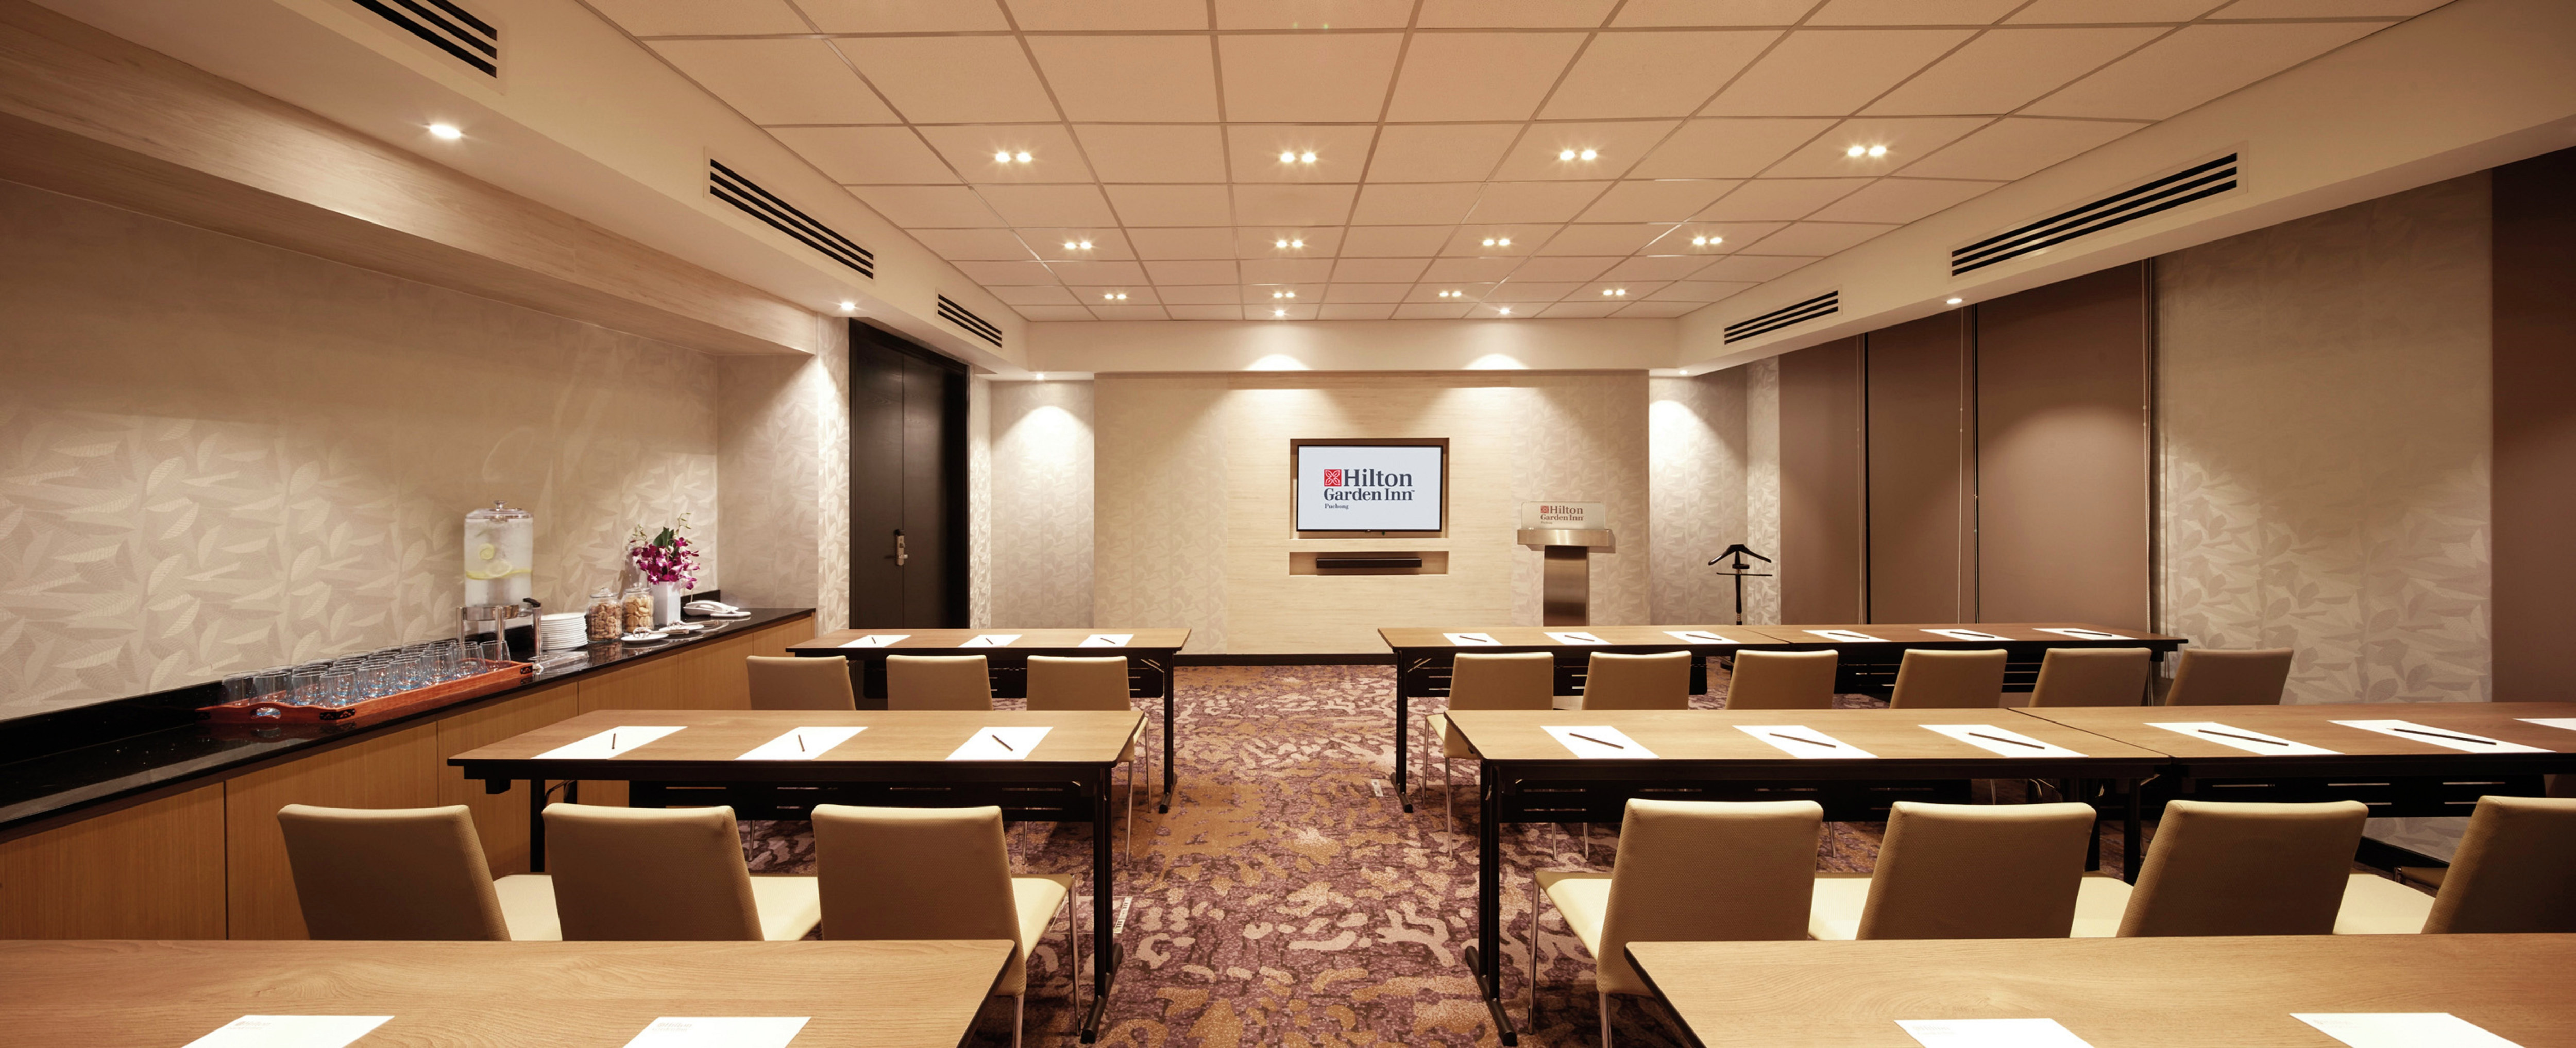 Enjoy the very latest in audio-visual technology in our meeting rooms.